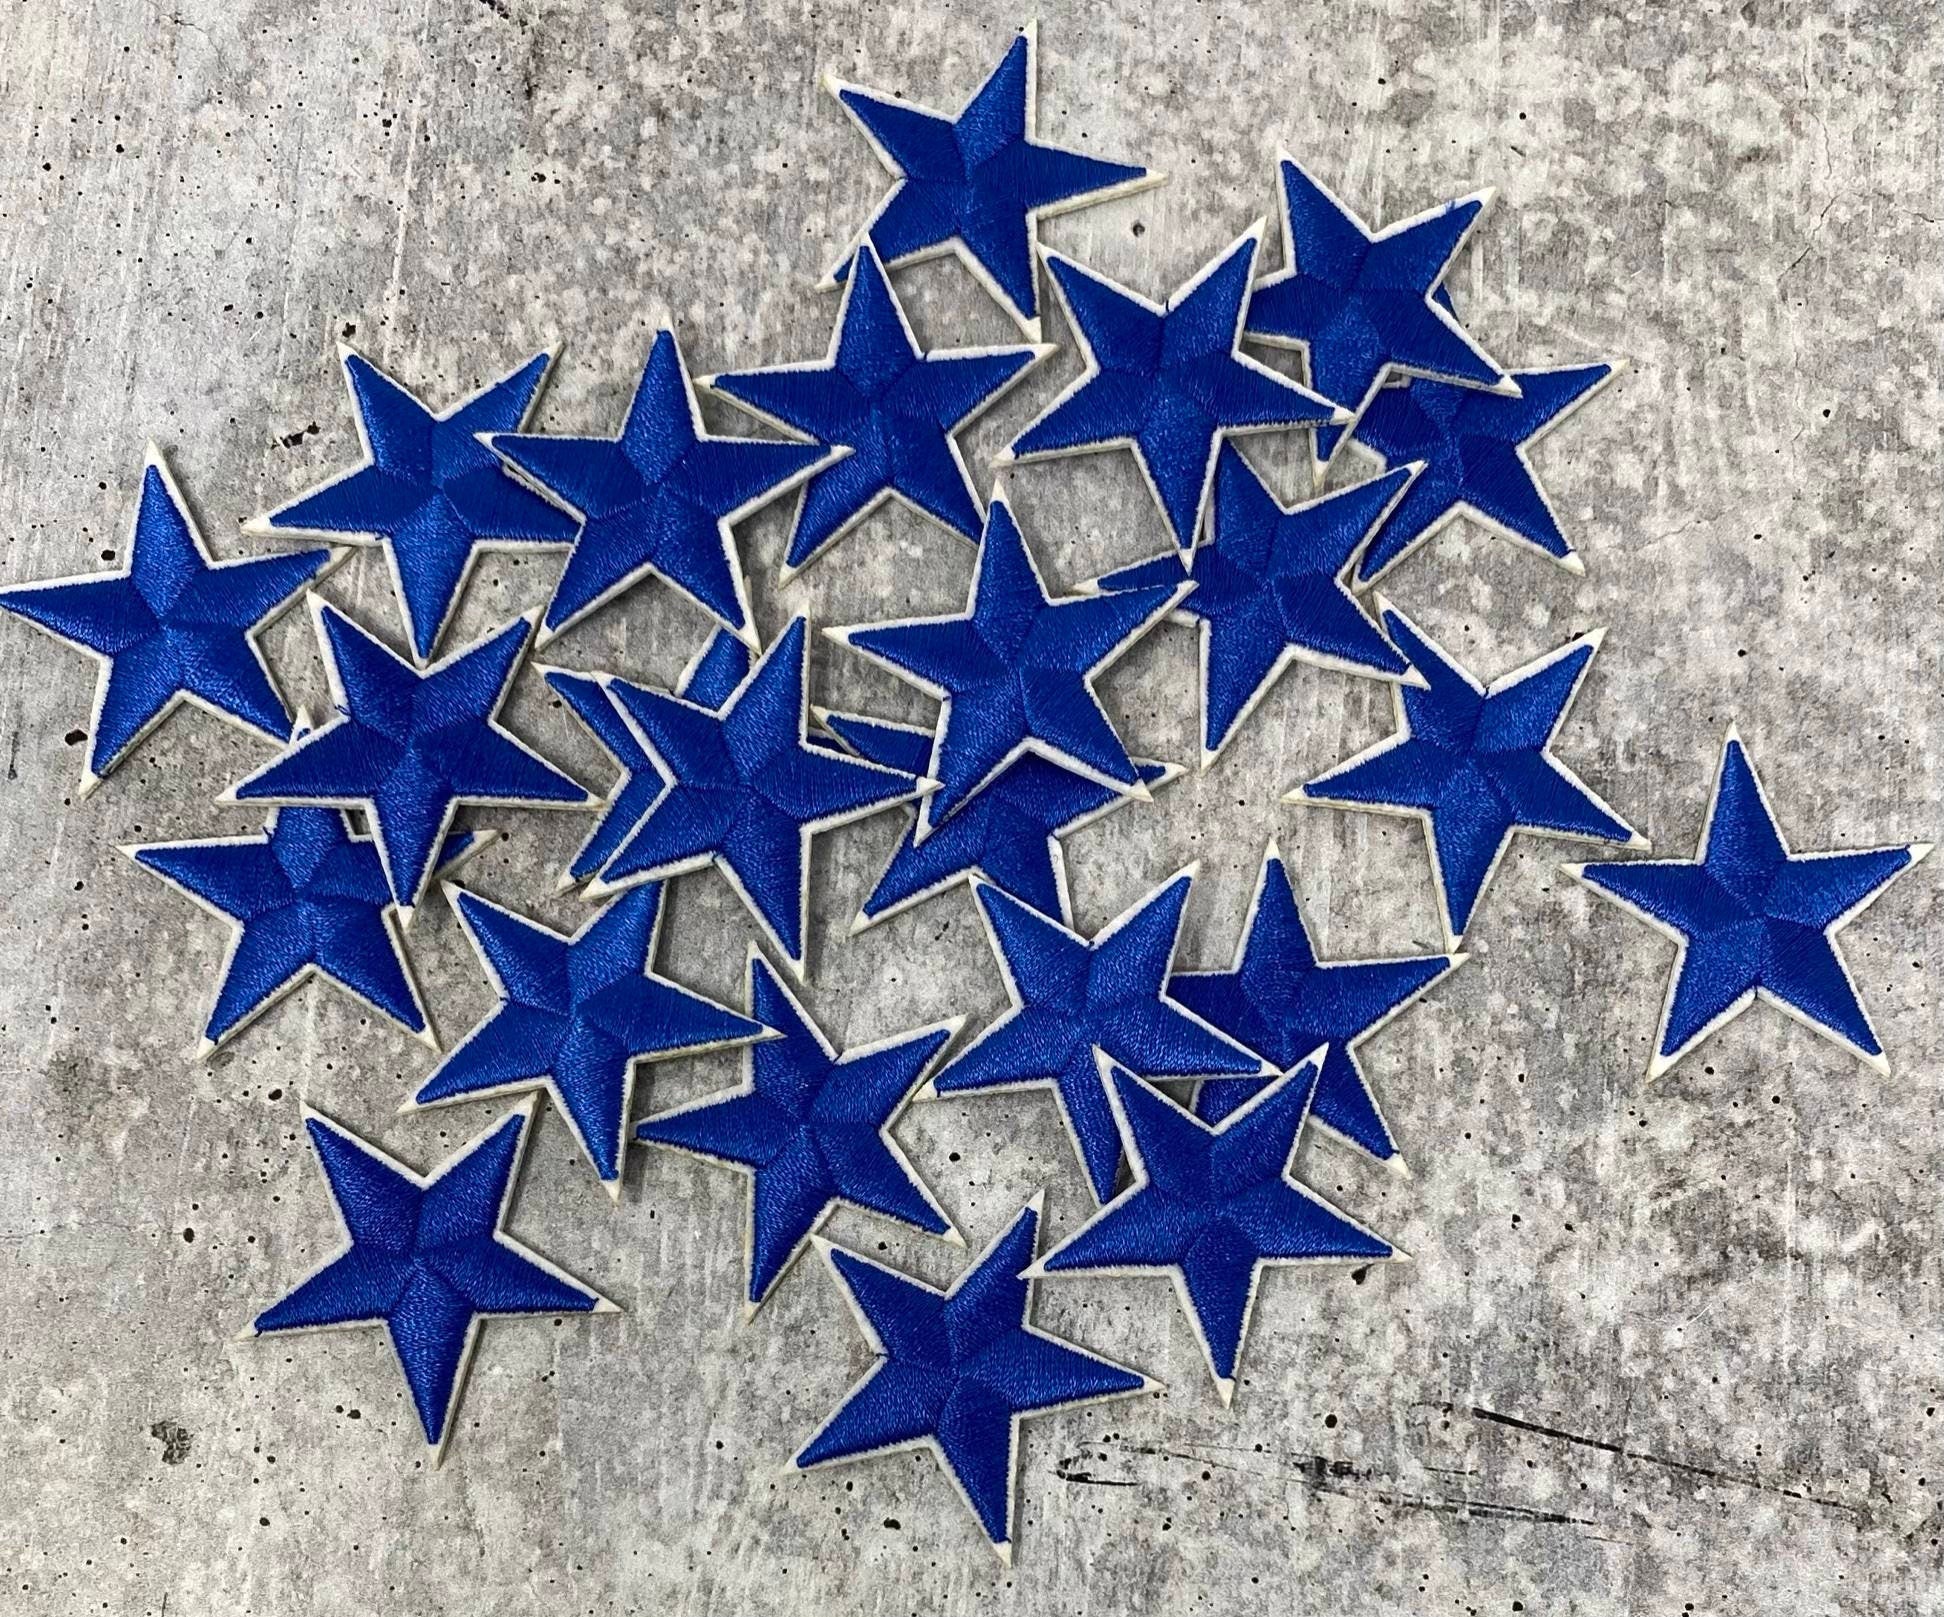 2pc/Mini BLUE Star Applique Set, Star Patch, 1" inch Small Stars, Cool Applique For Clothing, Iron-on Embroidered Patch, Patches for Clothes